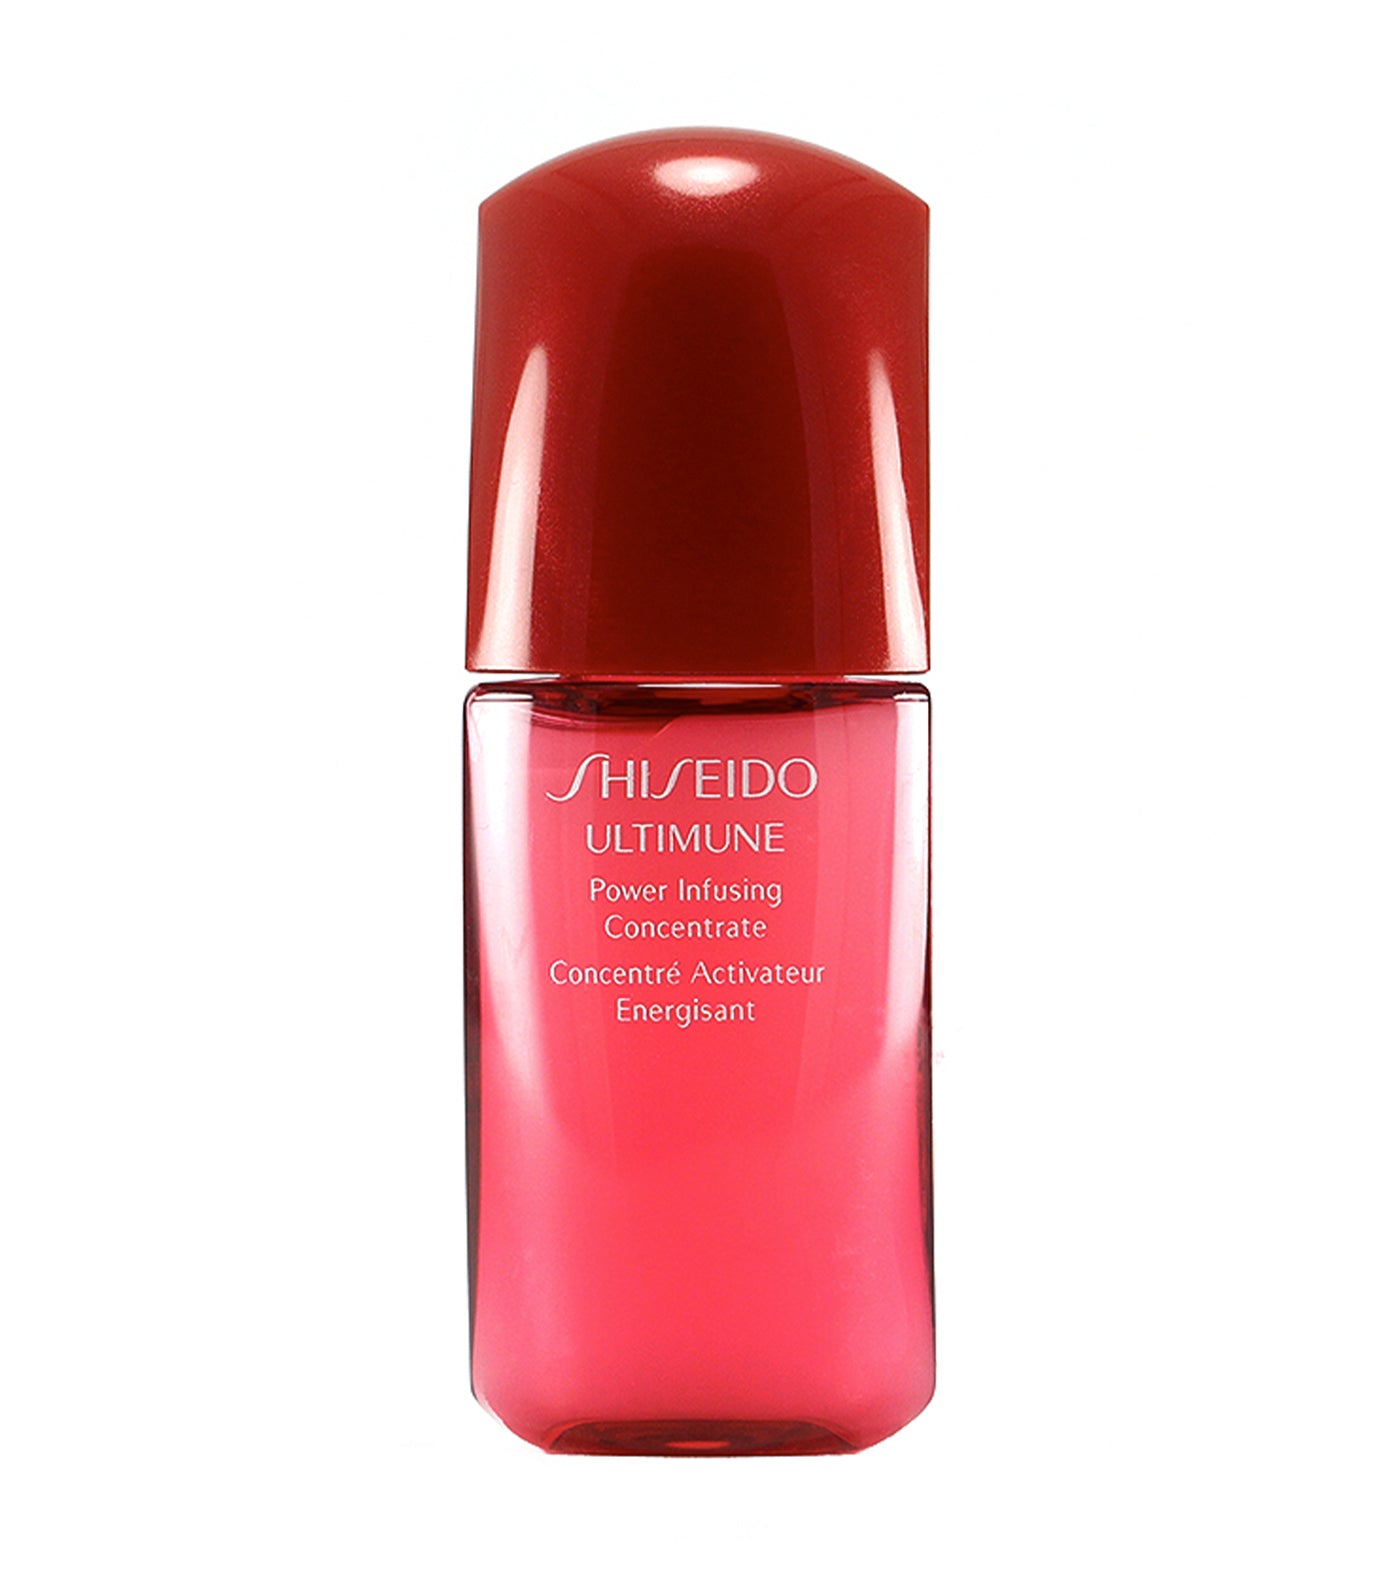 Free Deluxe Size Ultimune Power Infusing Concentrate